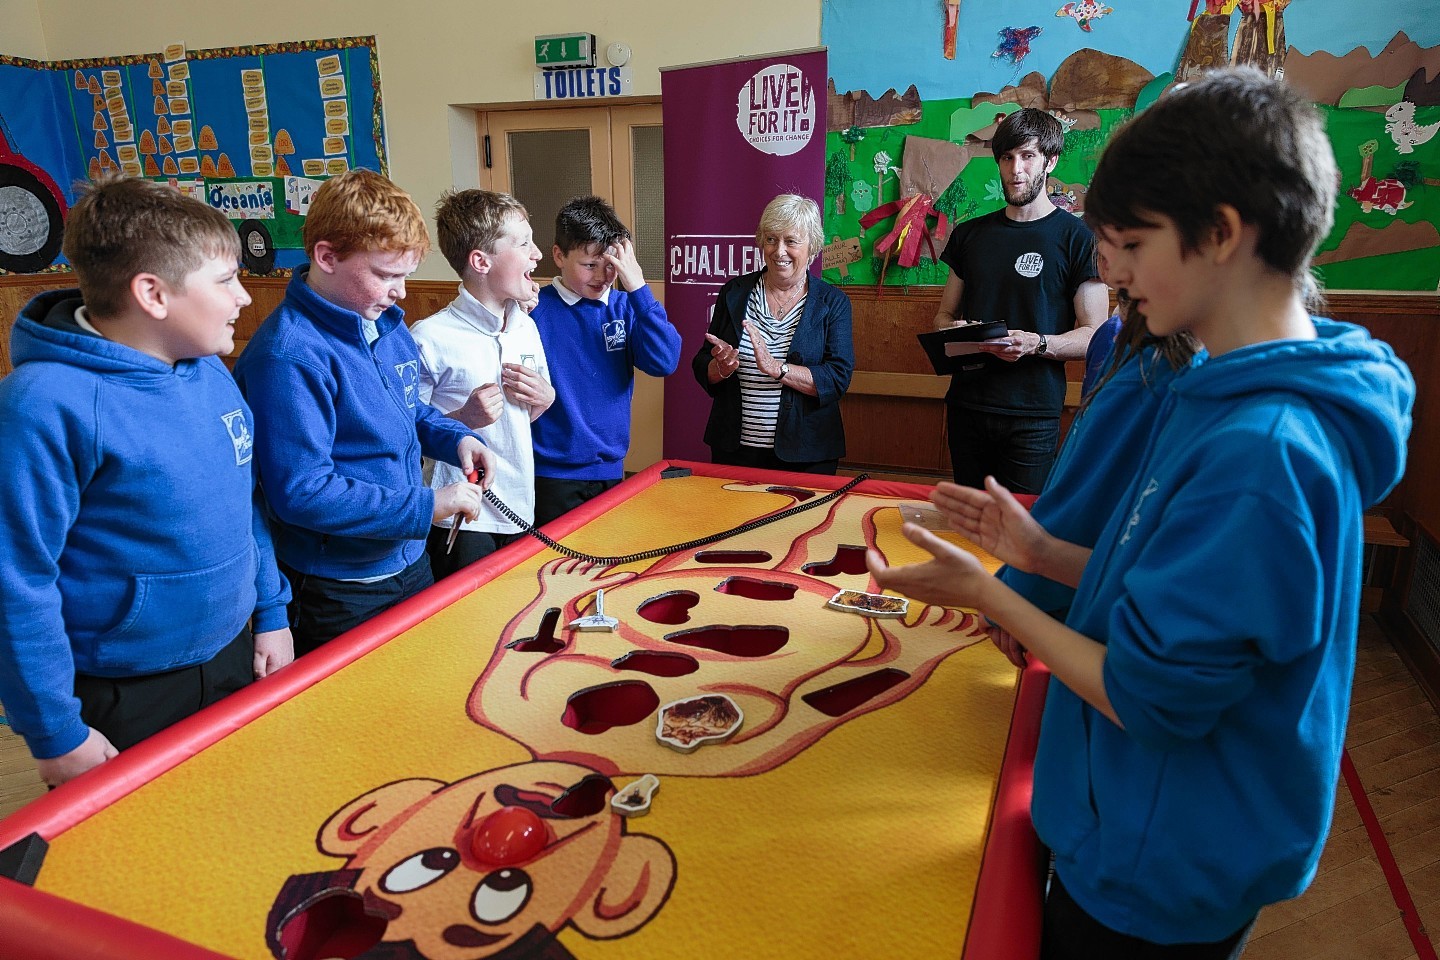 Nanette Milne MSP meets pupils at Rathen Primary School as they demonstrate what they have learned through Live For It!